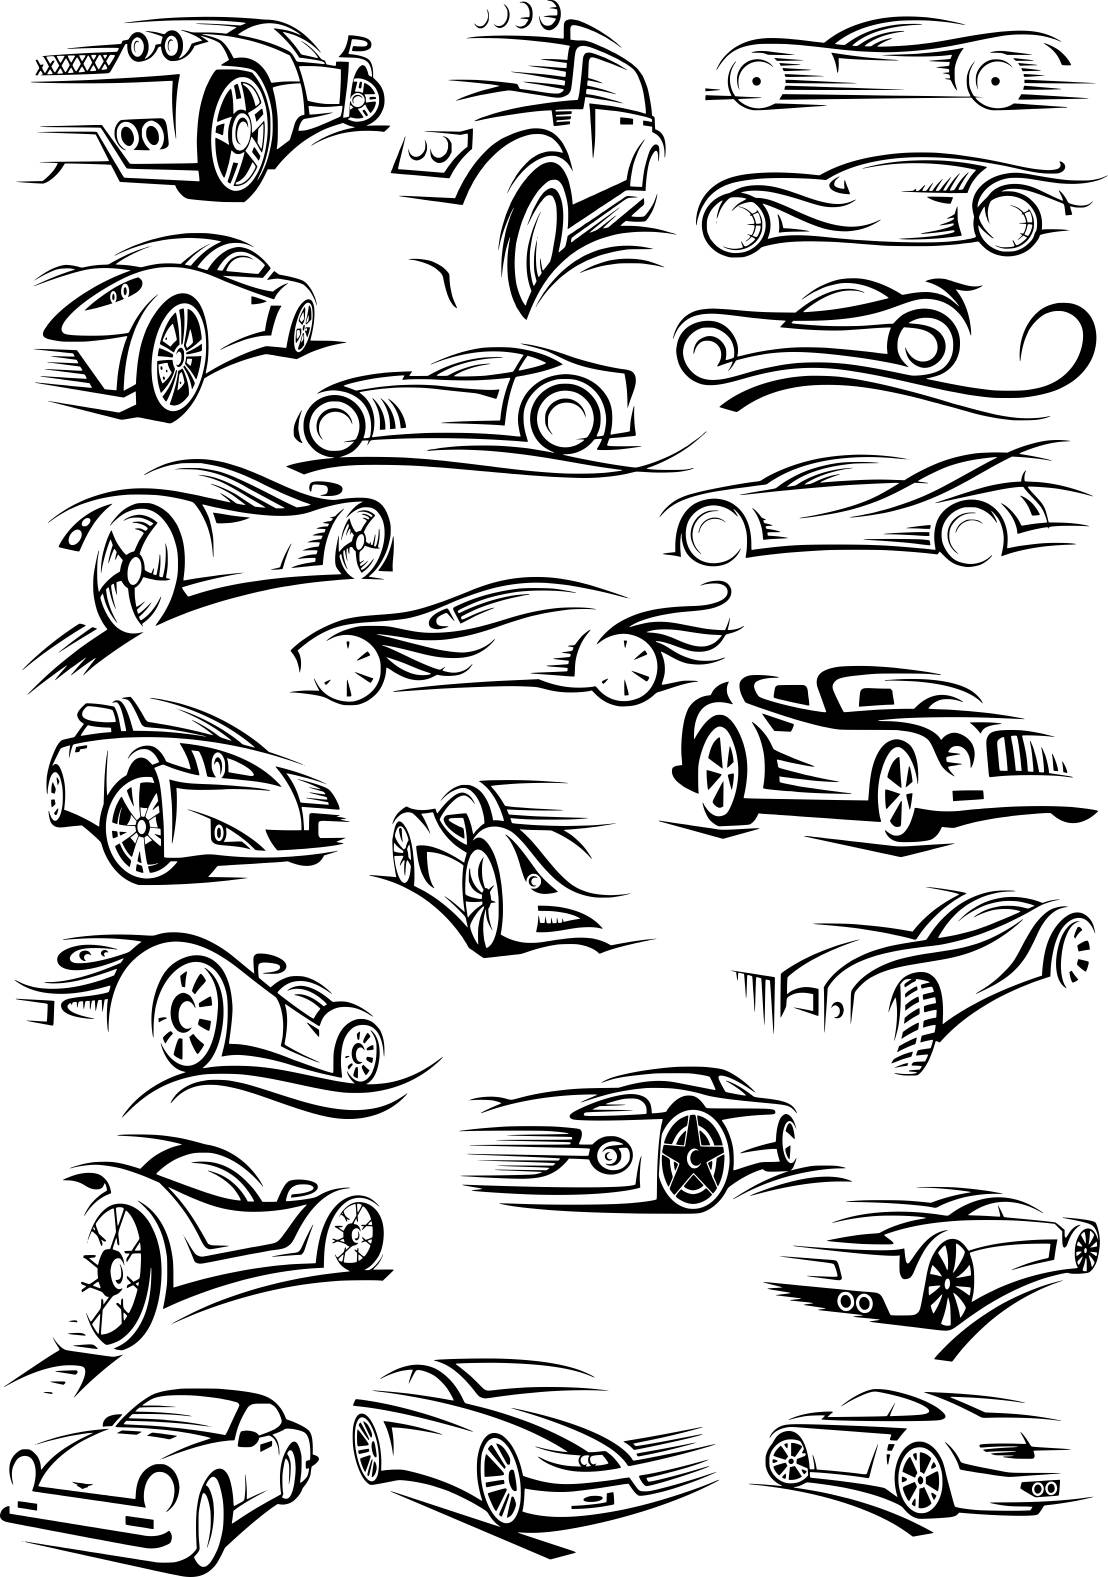 Cars Silhouette Stickers Free Vector cdr Download - 3axis.co